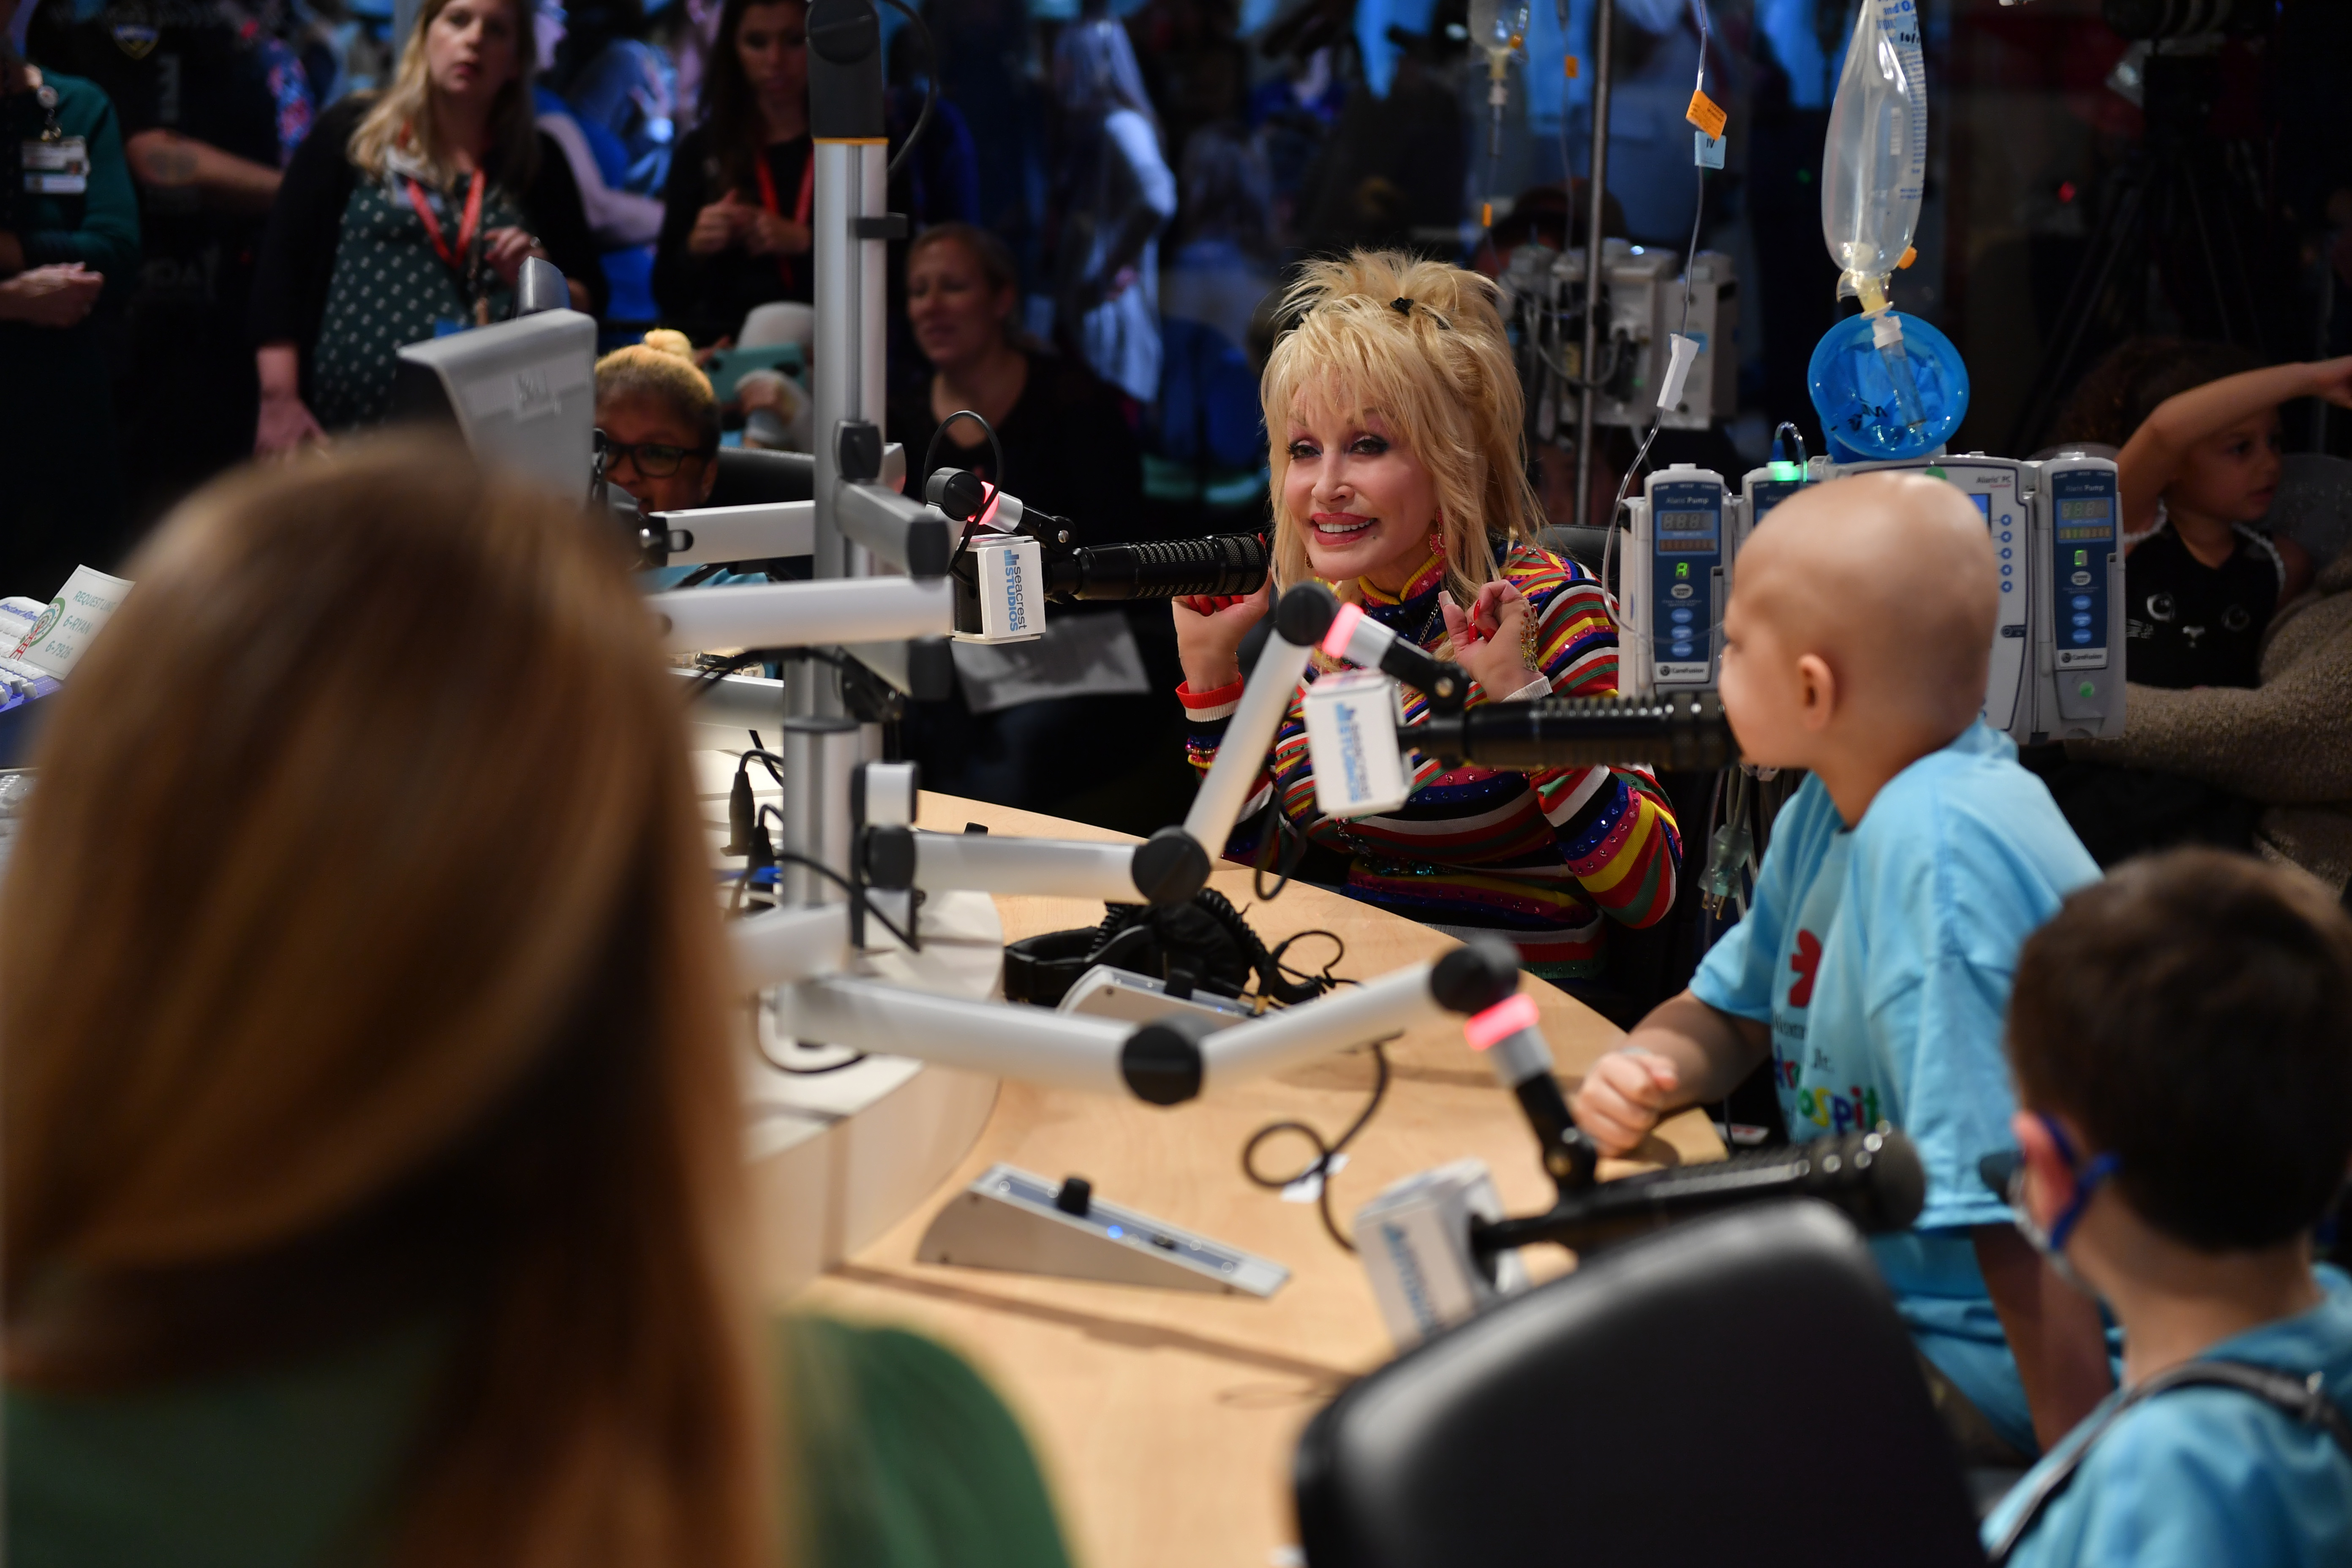 Dolly Parton visits Monroe Carell Jr. Children's Hospital at Vanderbilt to share her music and her own family's story of hope with kids and their parents in Nashville, Tennessee, on October 13, 2017. | Source: Getty Images